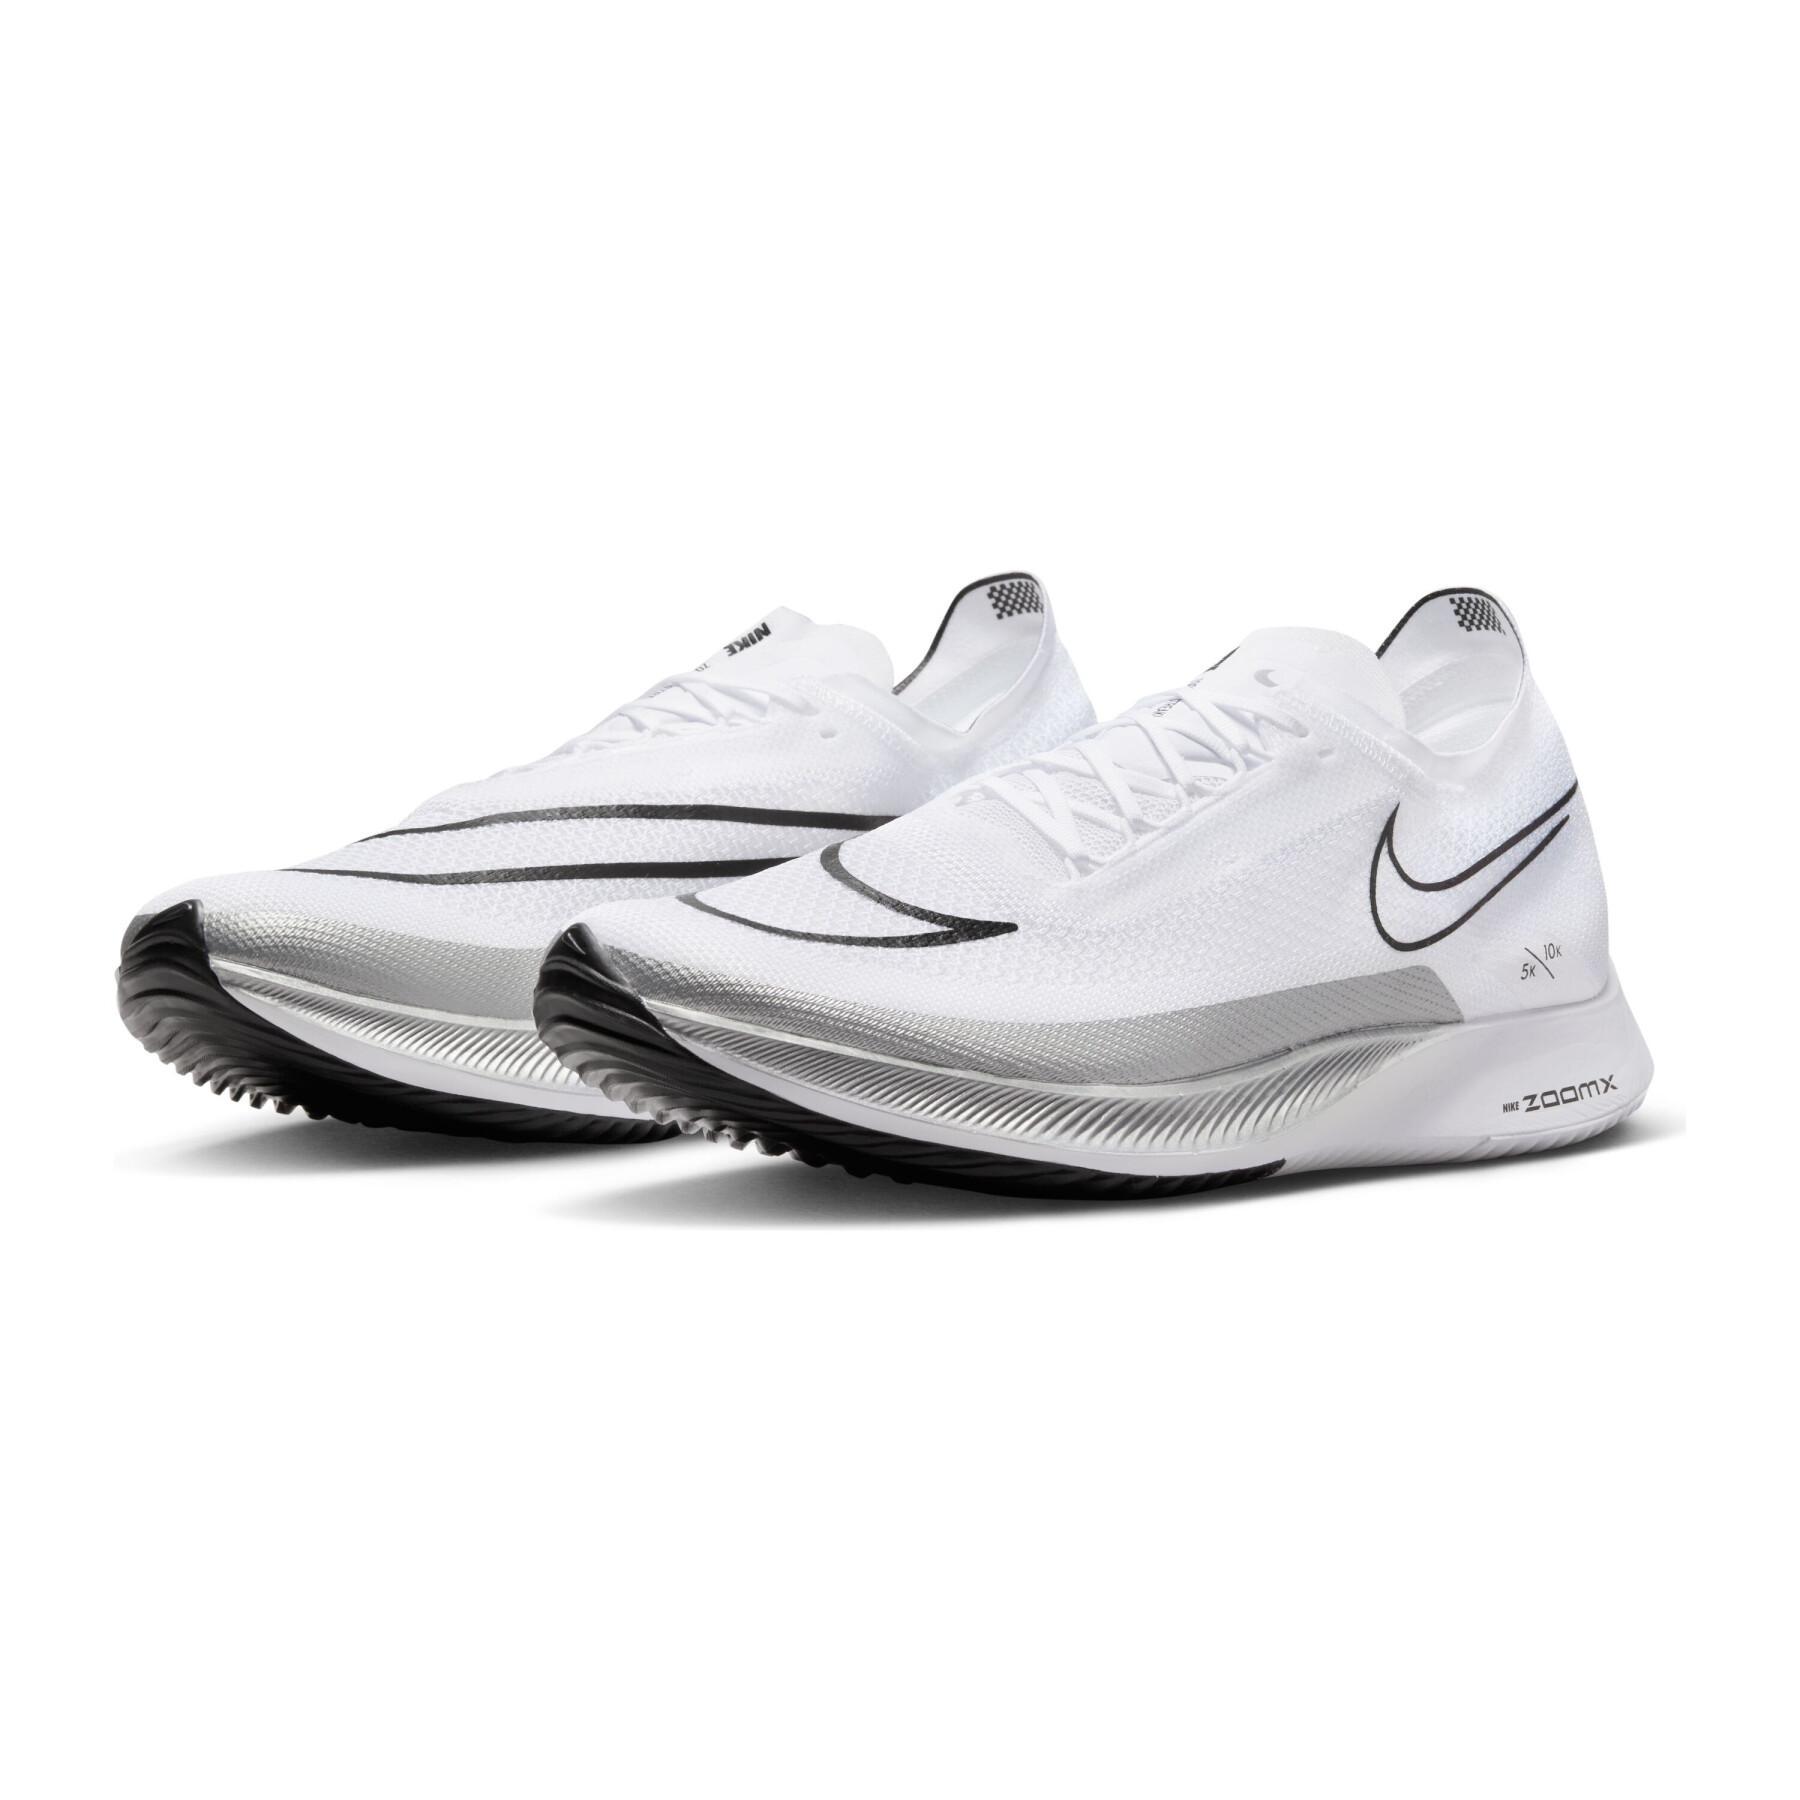 Chaussures de running Nike ZoomX Streakfly